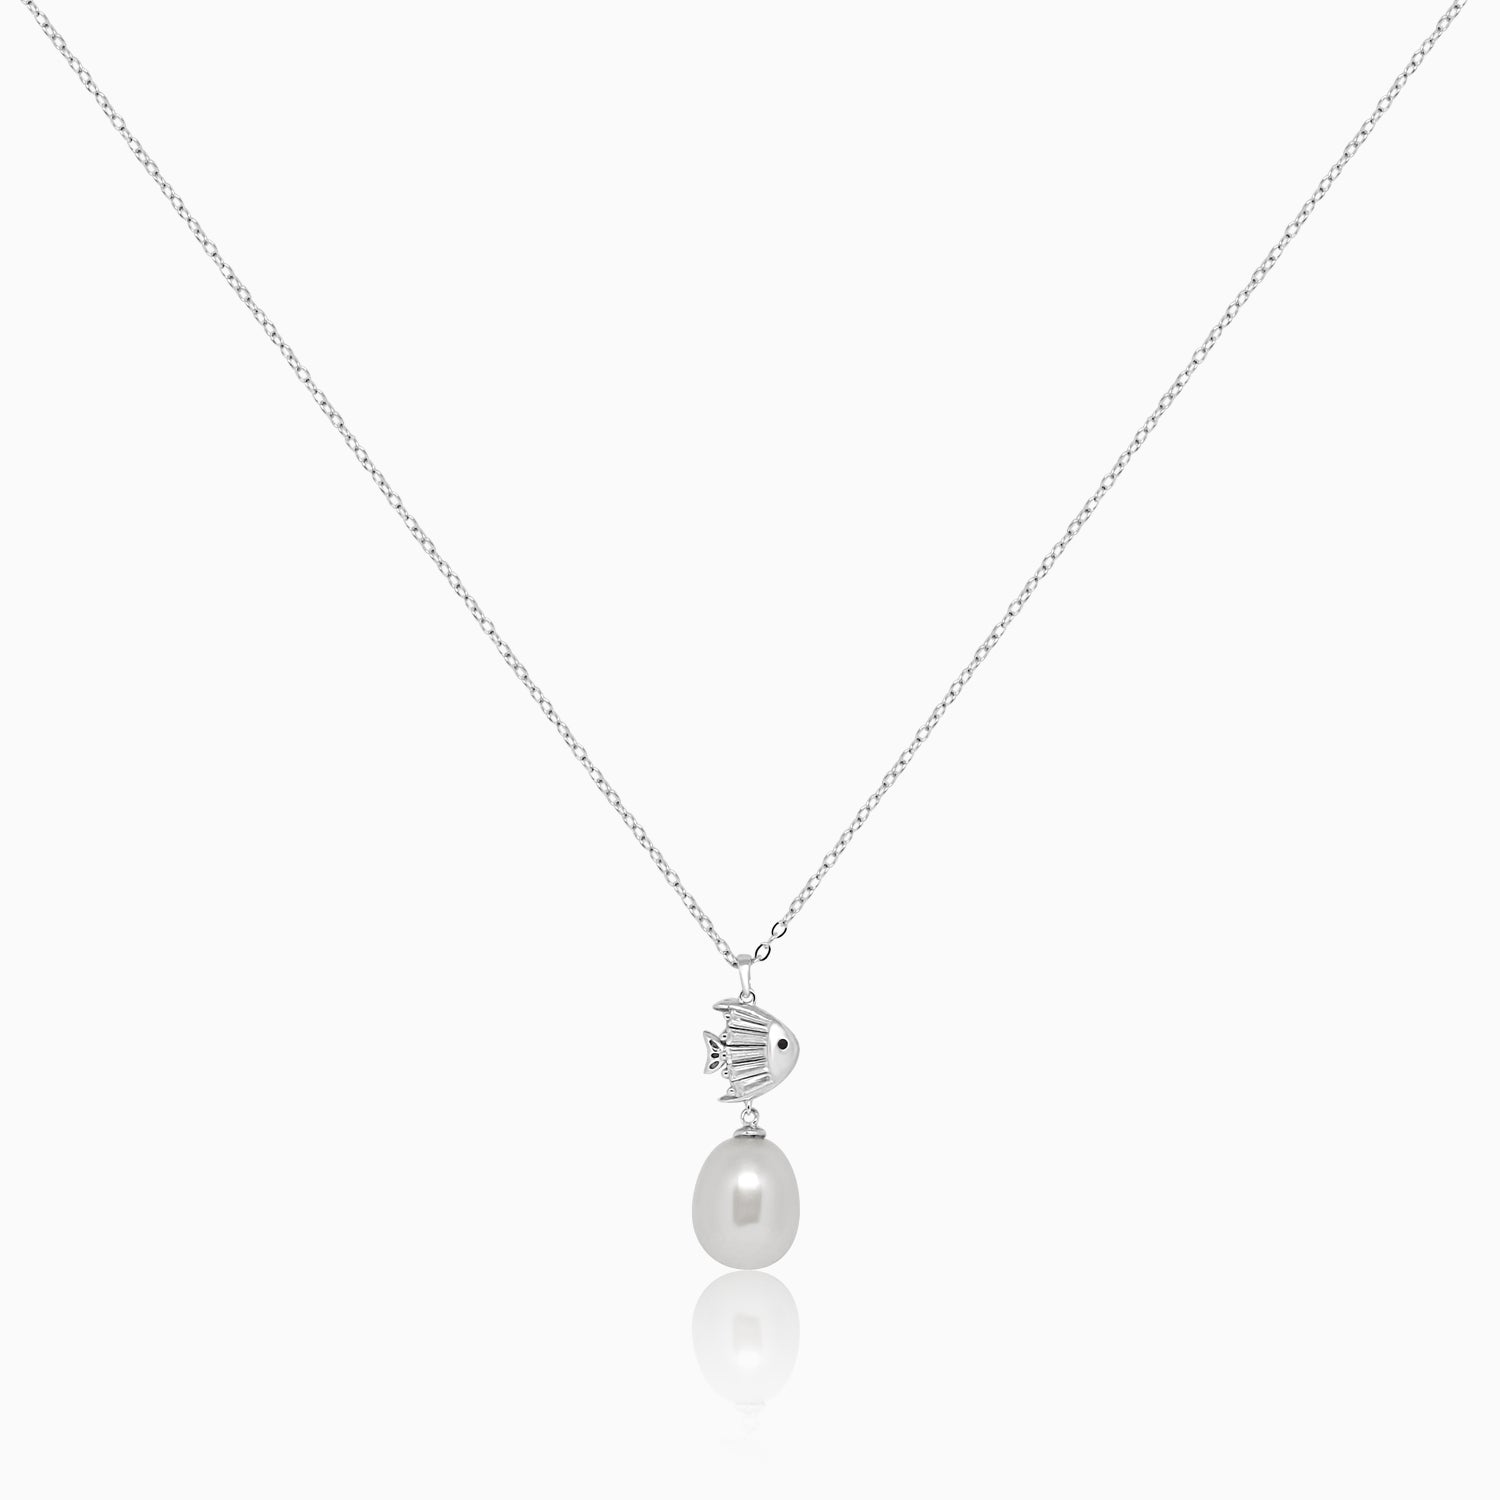 Silver Dangling Pearl Fish Necklace